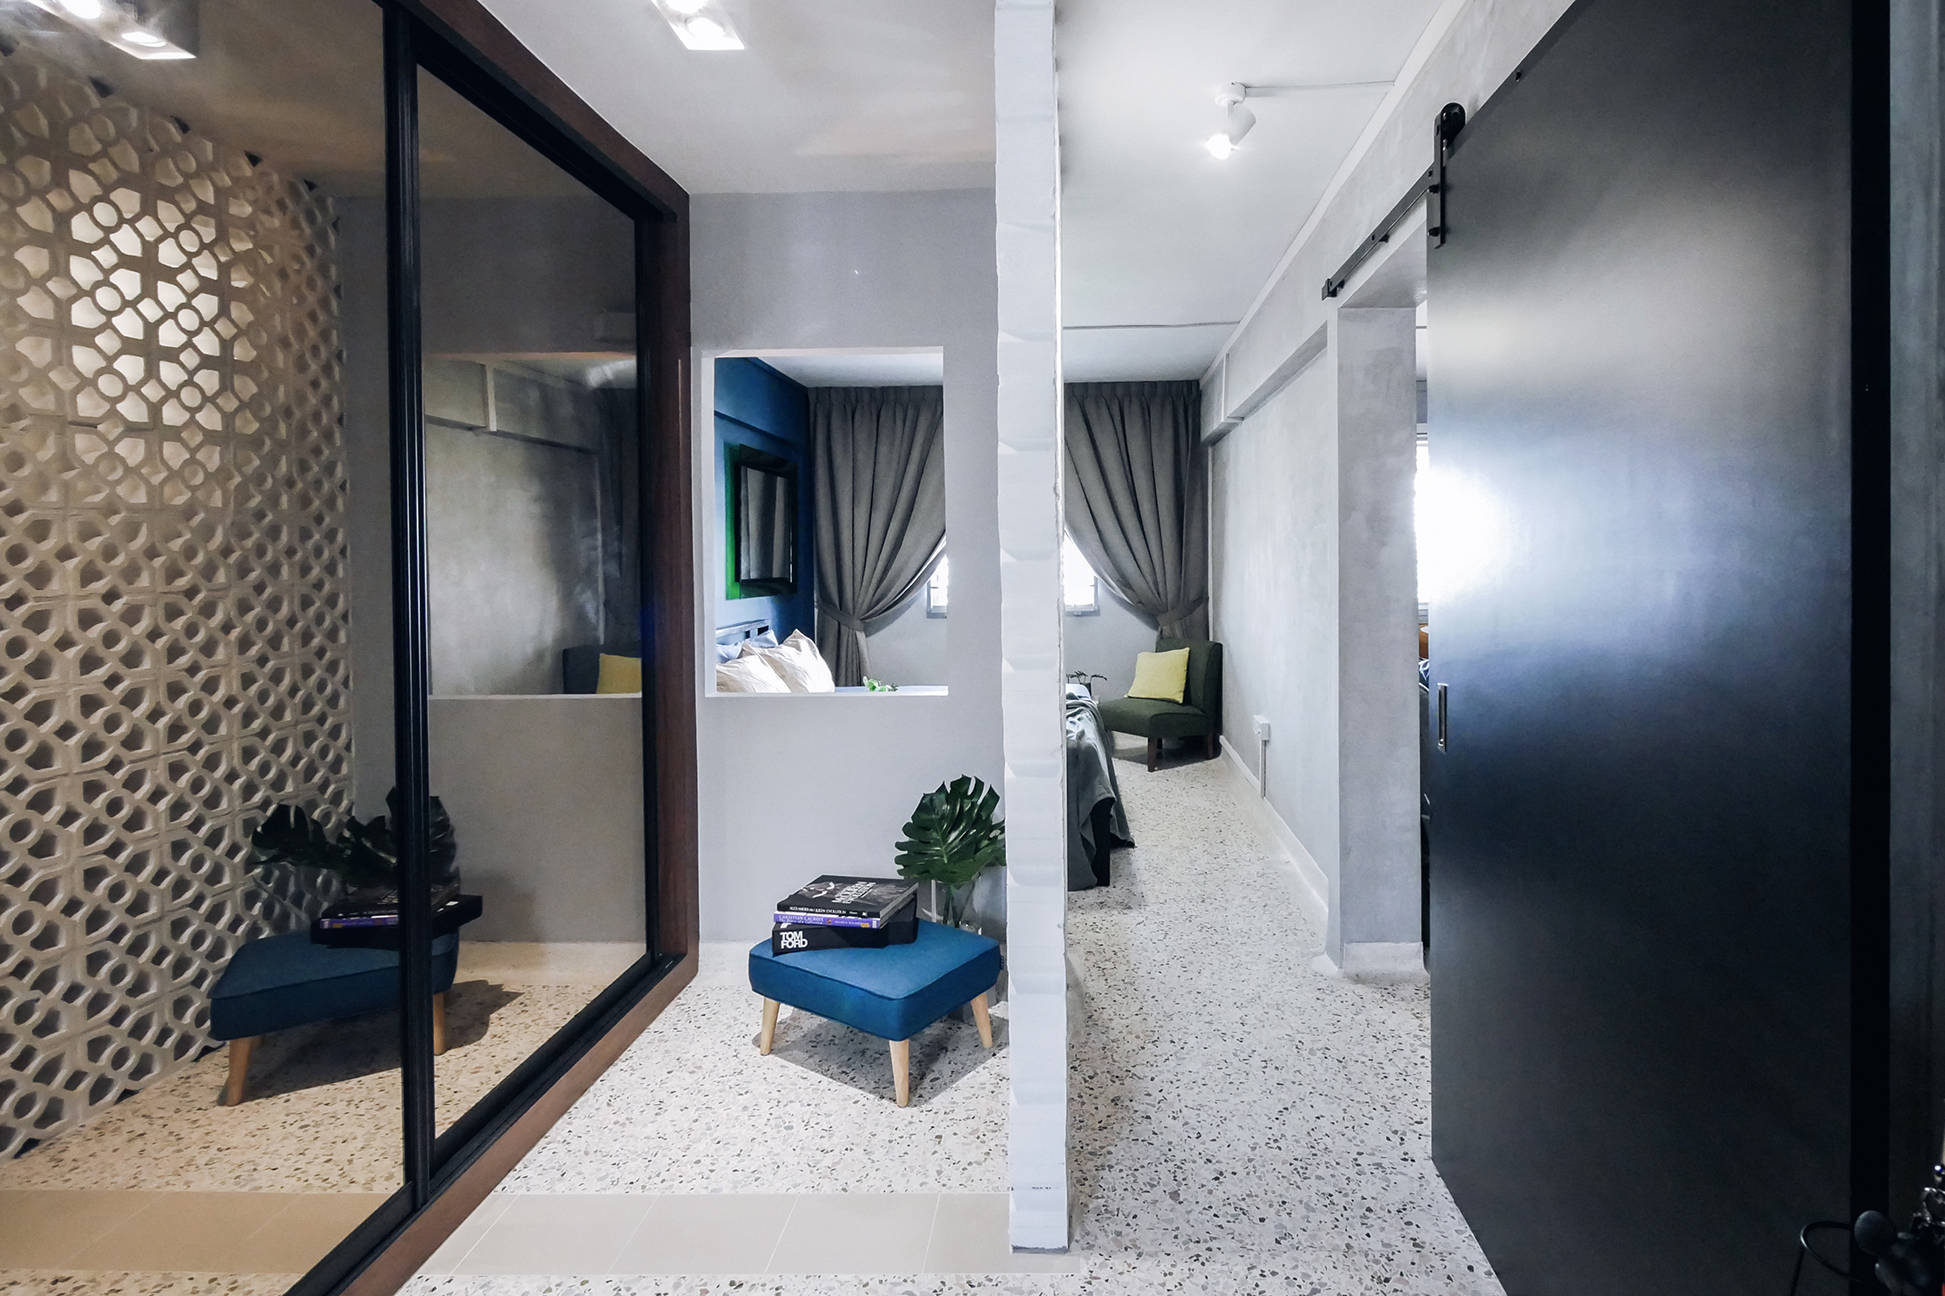 This 3-room HDB flat is both contemporary and nostalgic | Lookbox Living